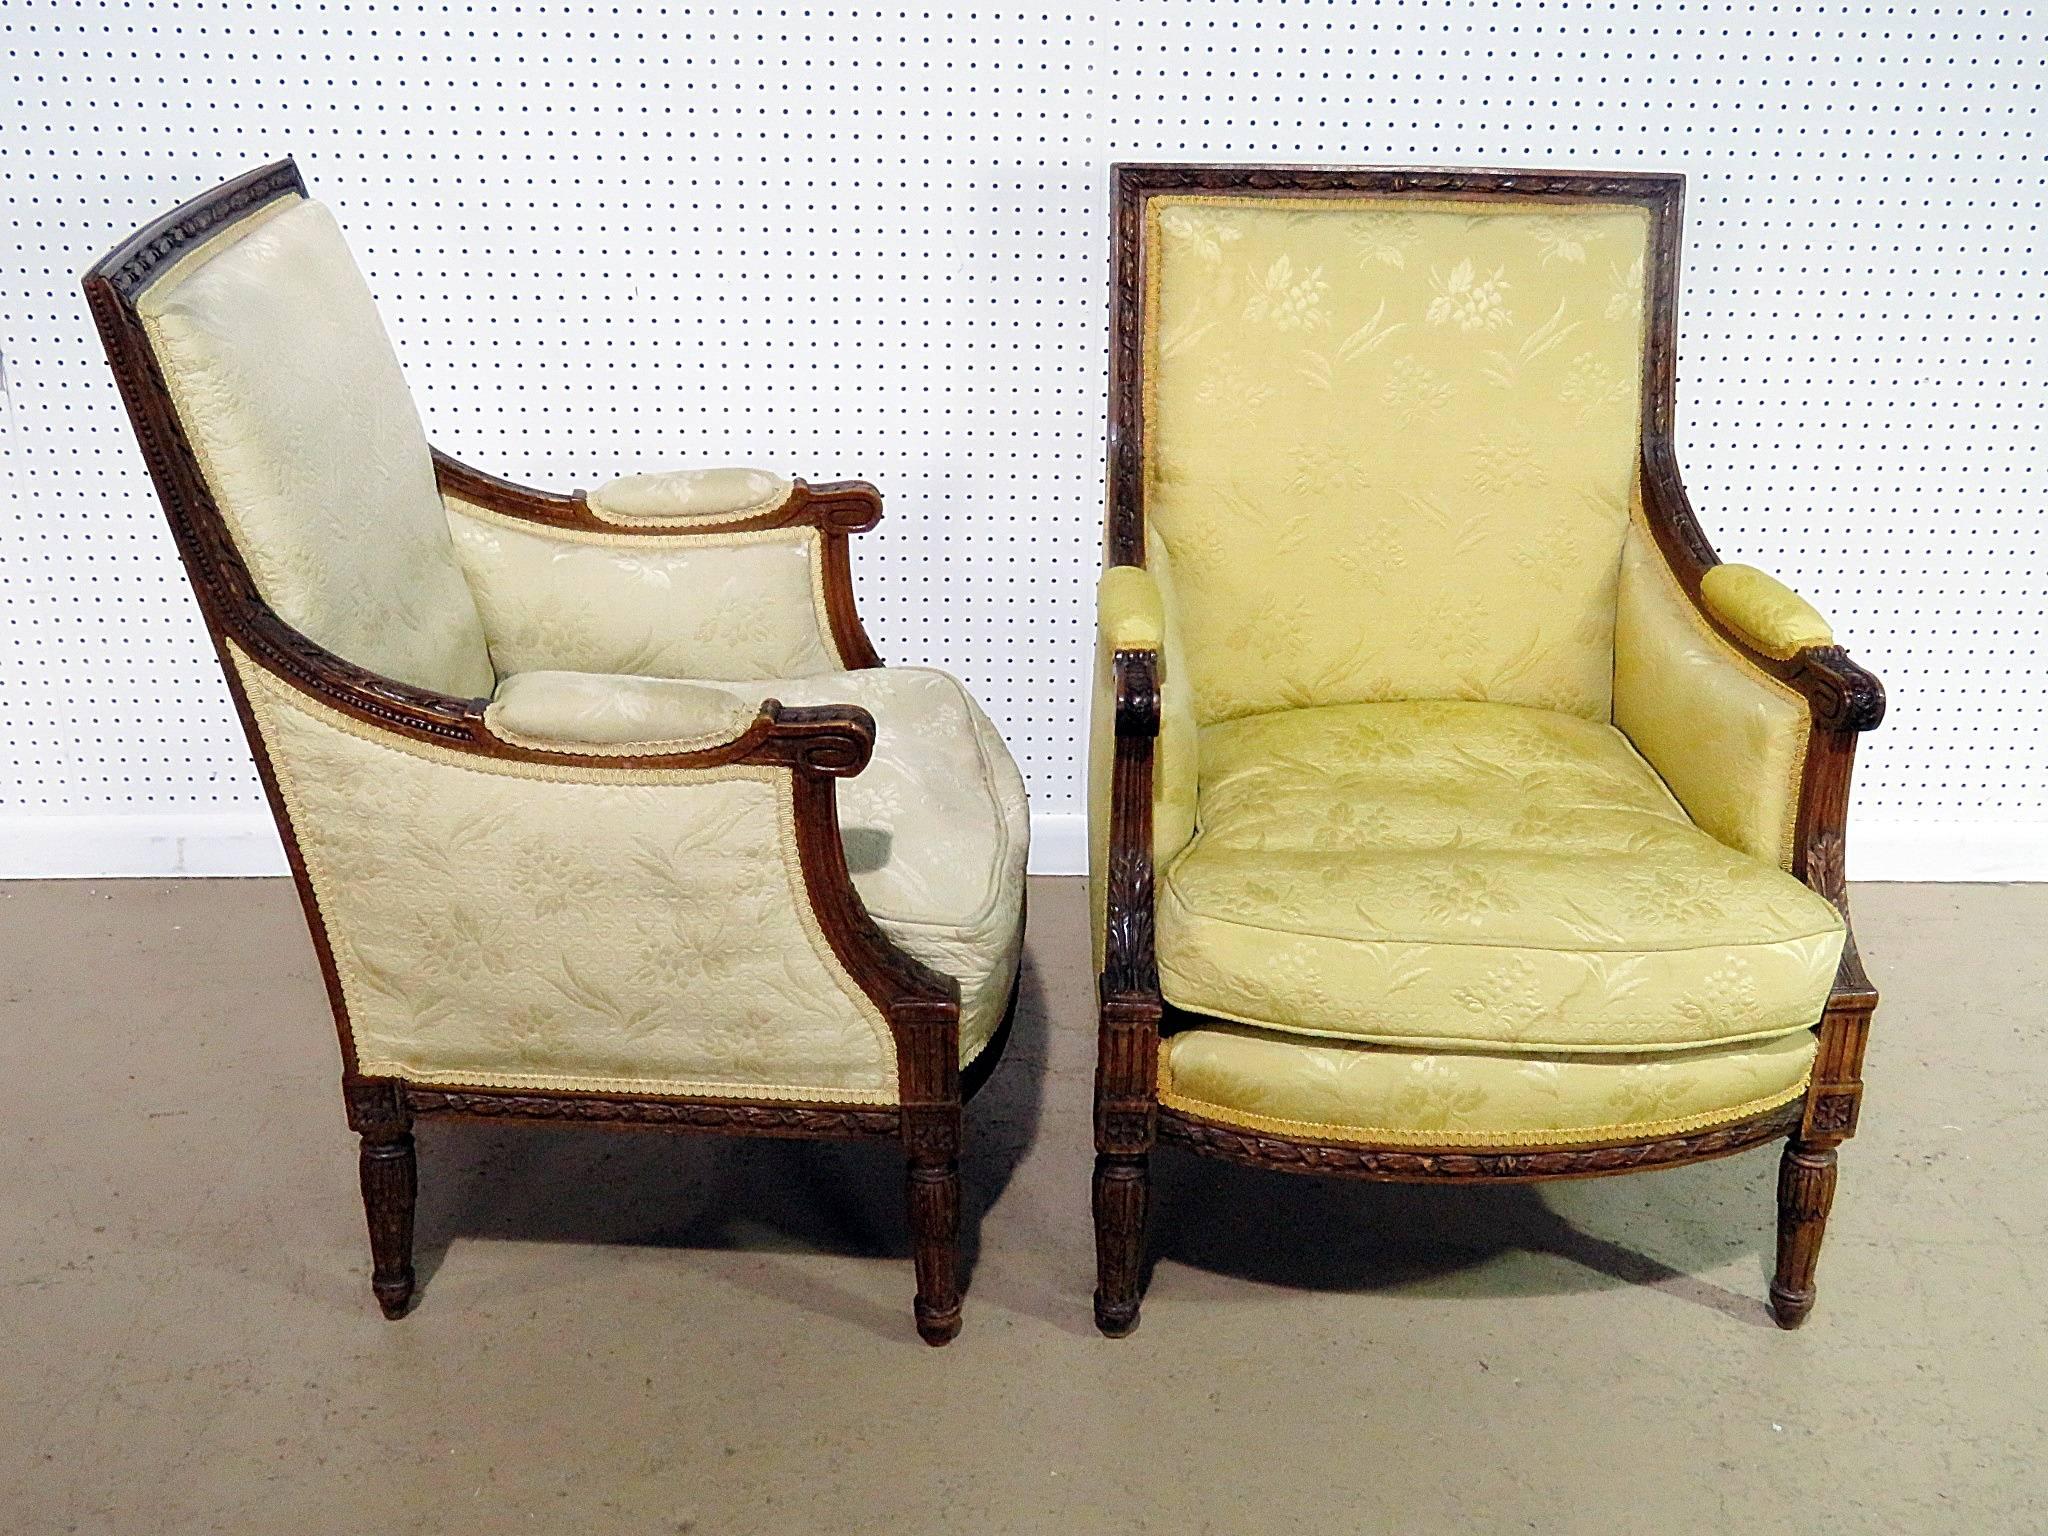 Companion pair of Louis XVI style bergeres attributed to Jansen.